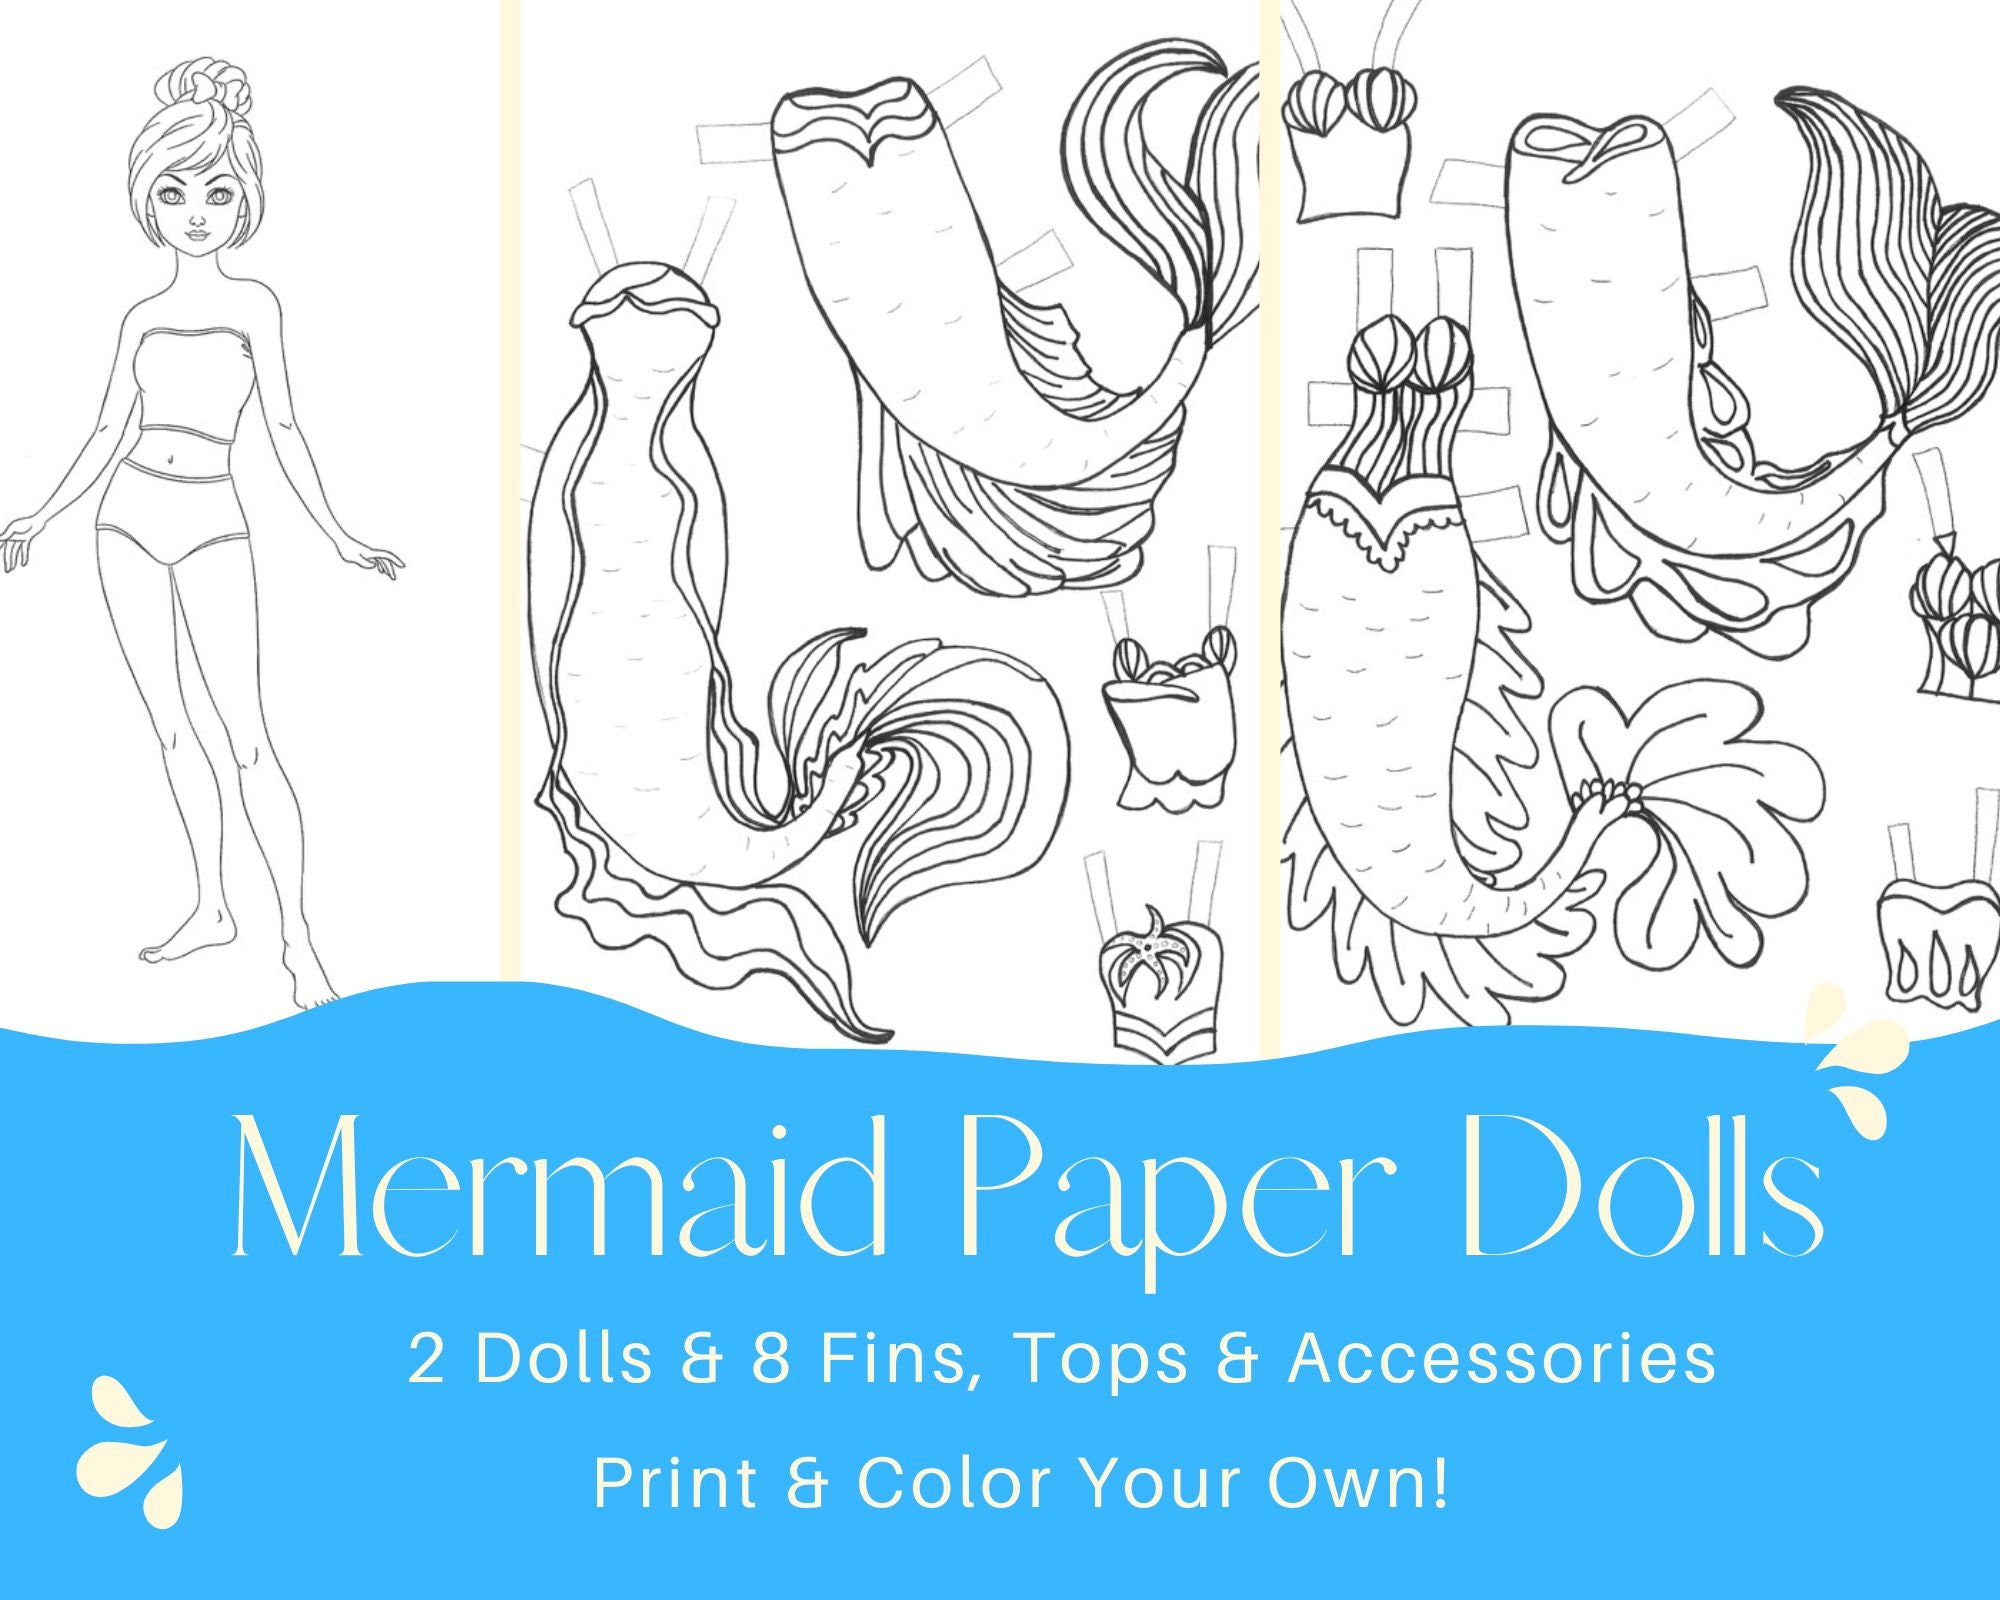 4 Articulated Mermaid Paper Dolls, Instant DIY Download Mermaid Crafts,  Mermaid and Under the Sea Party, Paper Dolls 